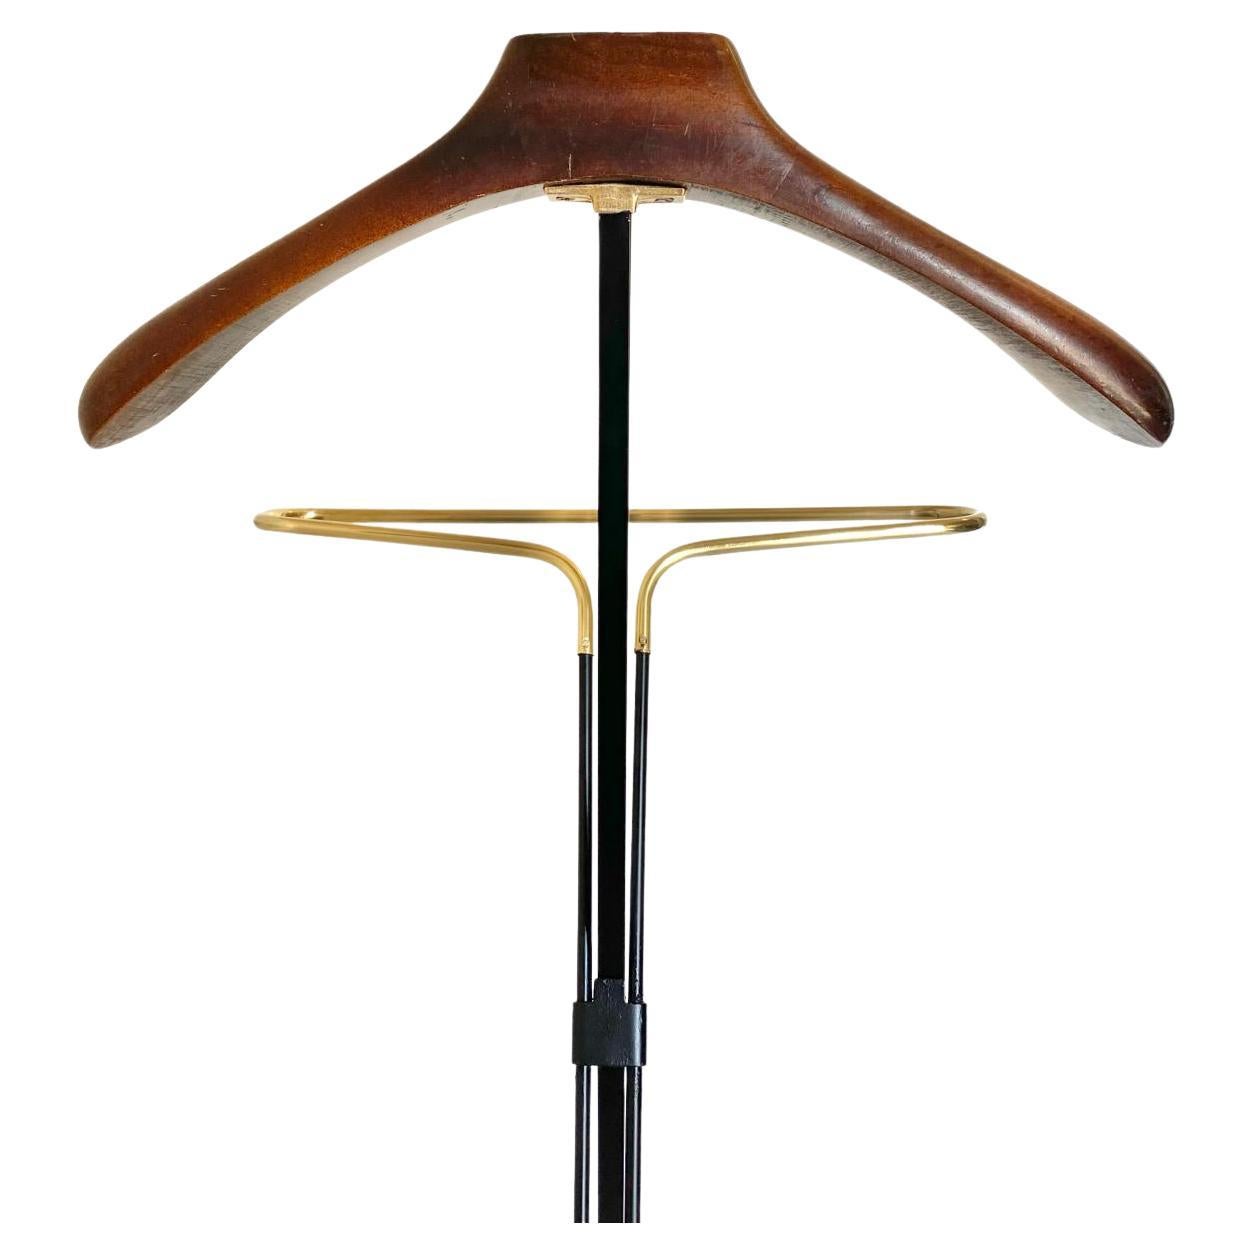 Vintage folding valet stand in wood, iron and brass, Reguitti, Italy 1950s For Sale 4